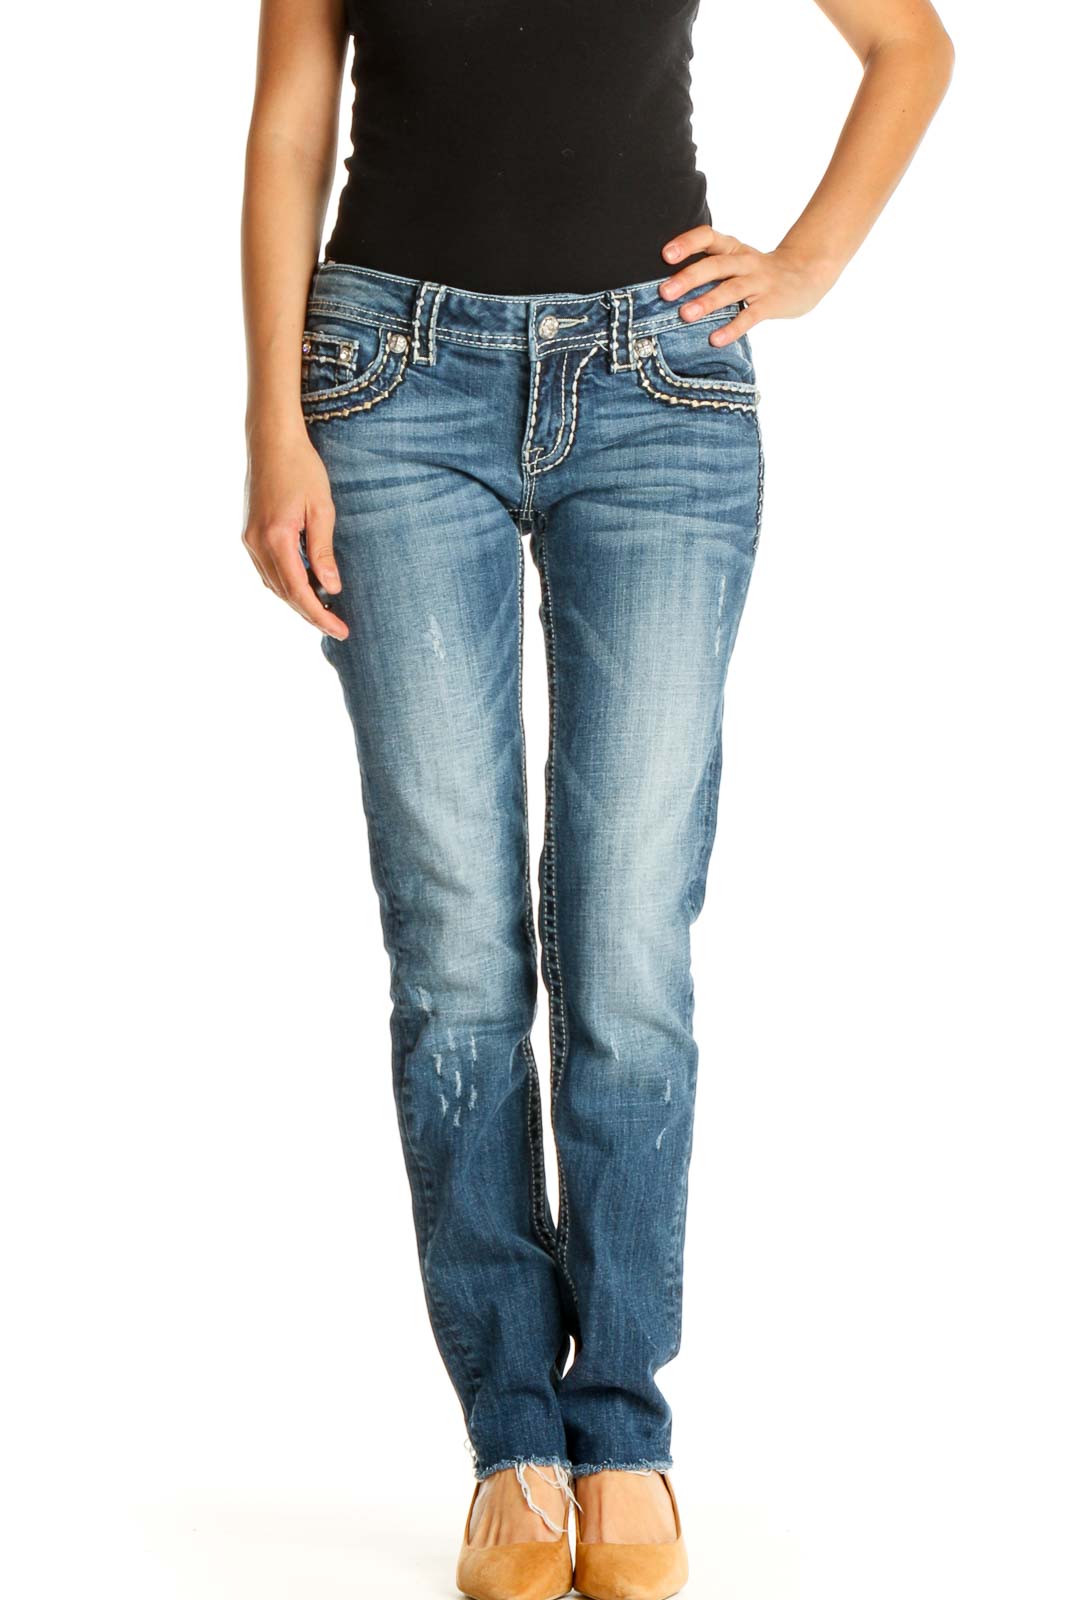 Gray Straight Leg Jeans Front